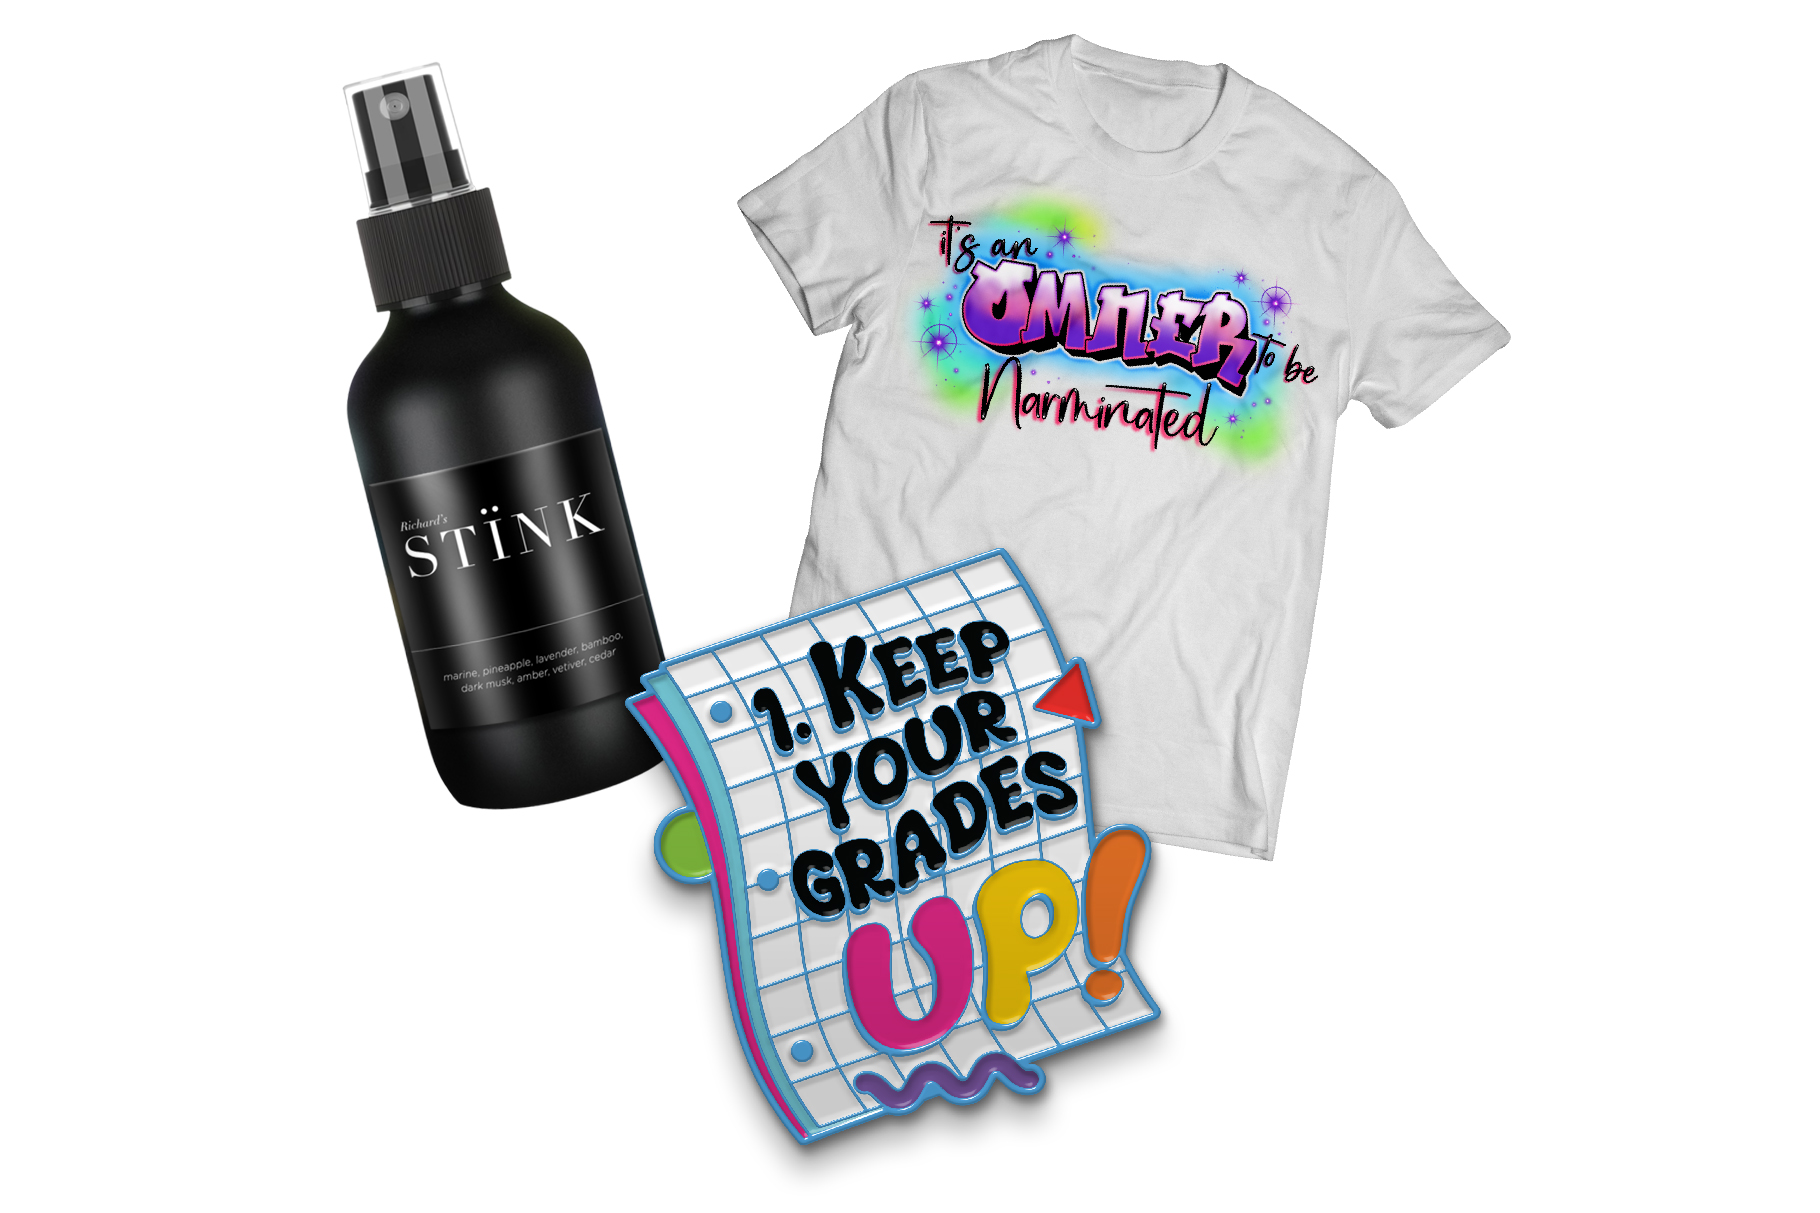 The April McElroy merch items. From left to right is a room spray, an enamel pin, and a t-shirt. The room spray is a black bottle with a black label and white writing. It says, “Richard’s Stïnk.” The enamel pin is curvy graph paper that says, “1. Keep your grades up!” The “up!” is in pink, yellow, and orange. The t-shirt is white and says, “It’s an omner to be narminated.” The text is a stylized airbrush font.  